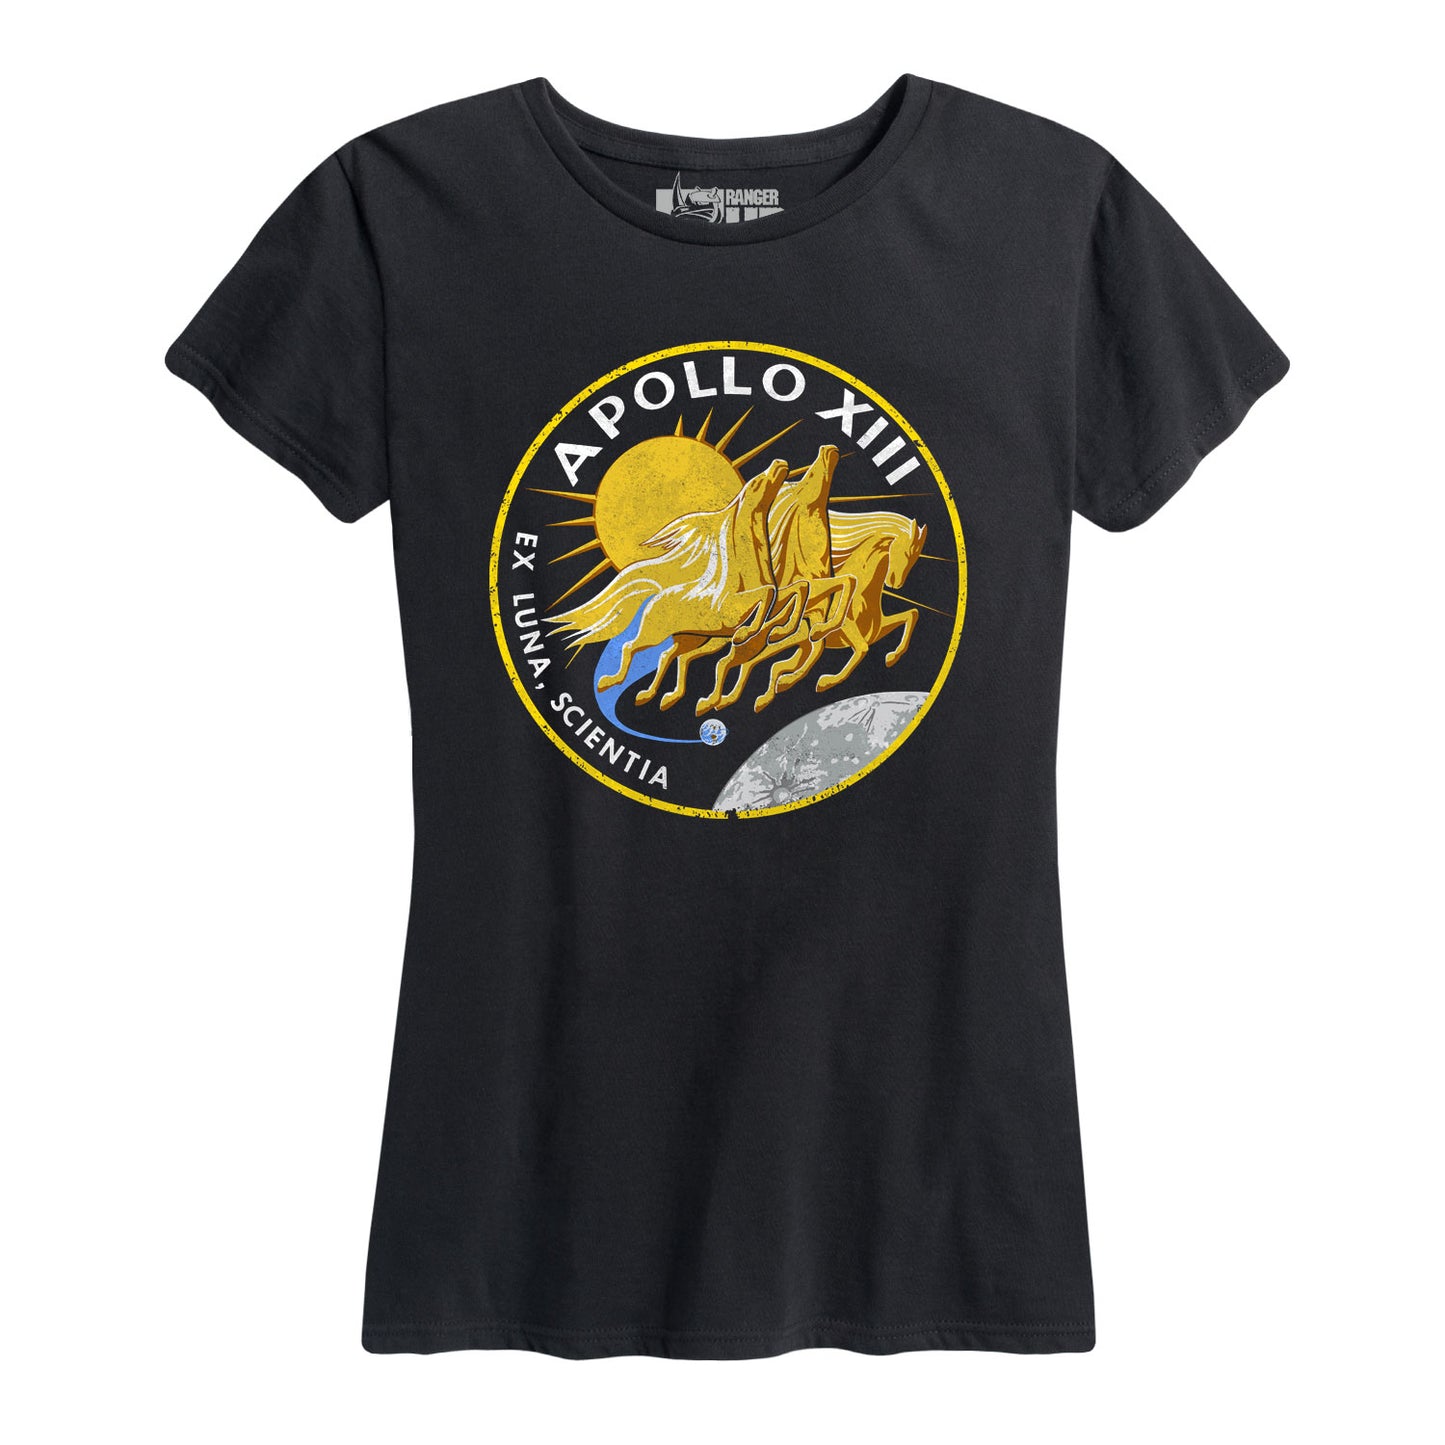 Women's Apollo 13 Mission Patch Tee